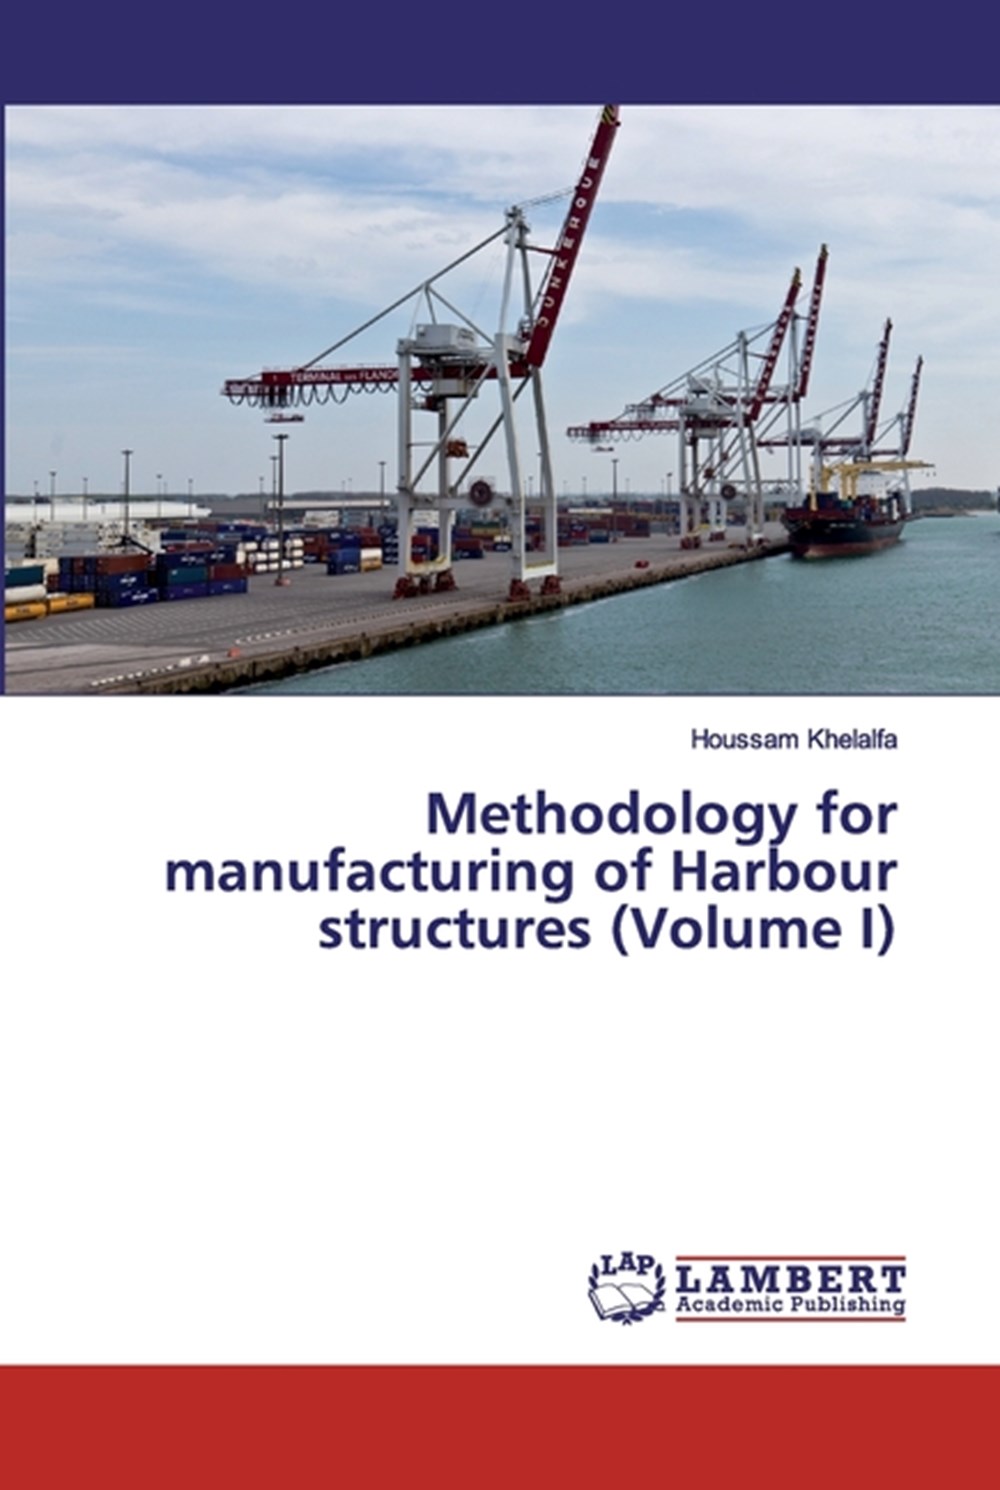 Methodology for manufacturing of Harbour structures (Volume I)